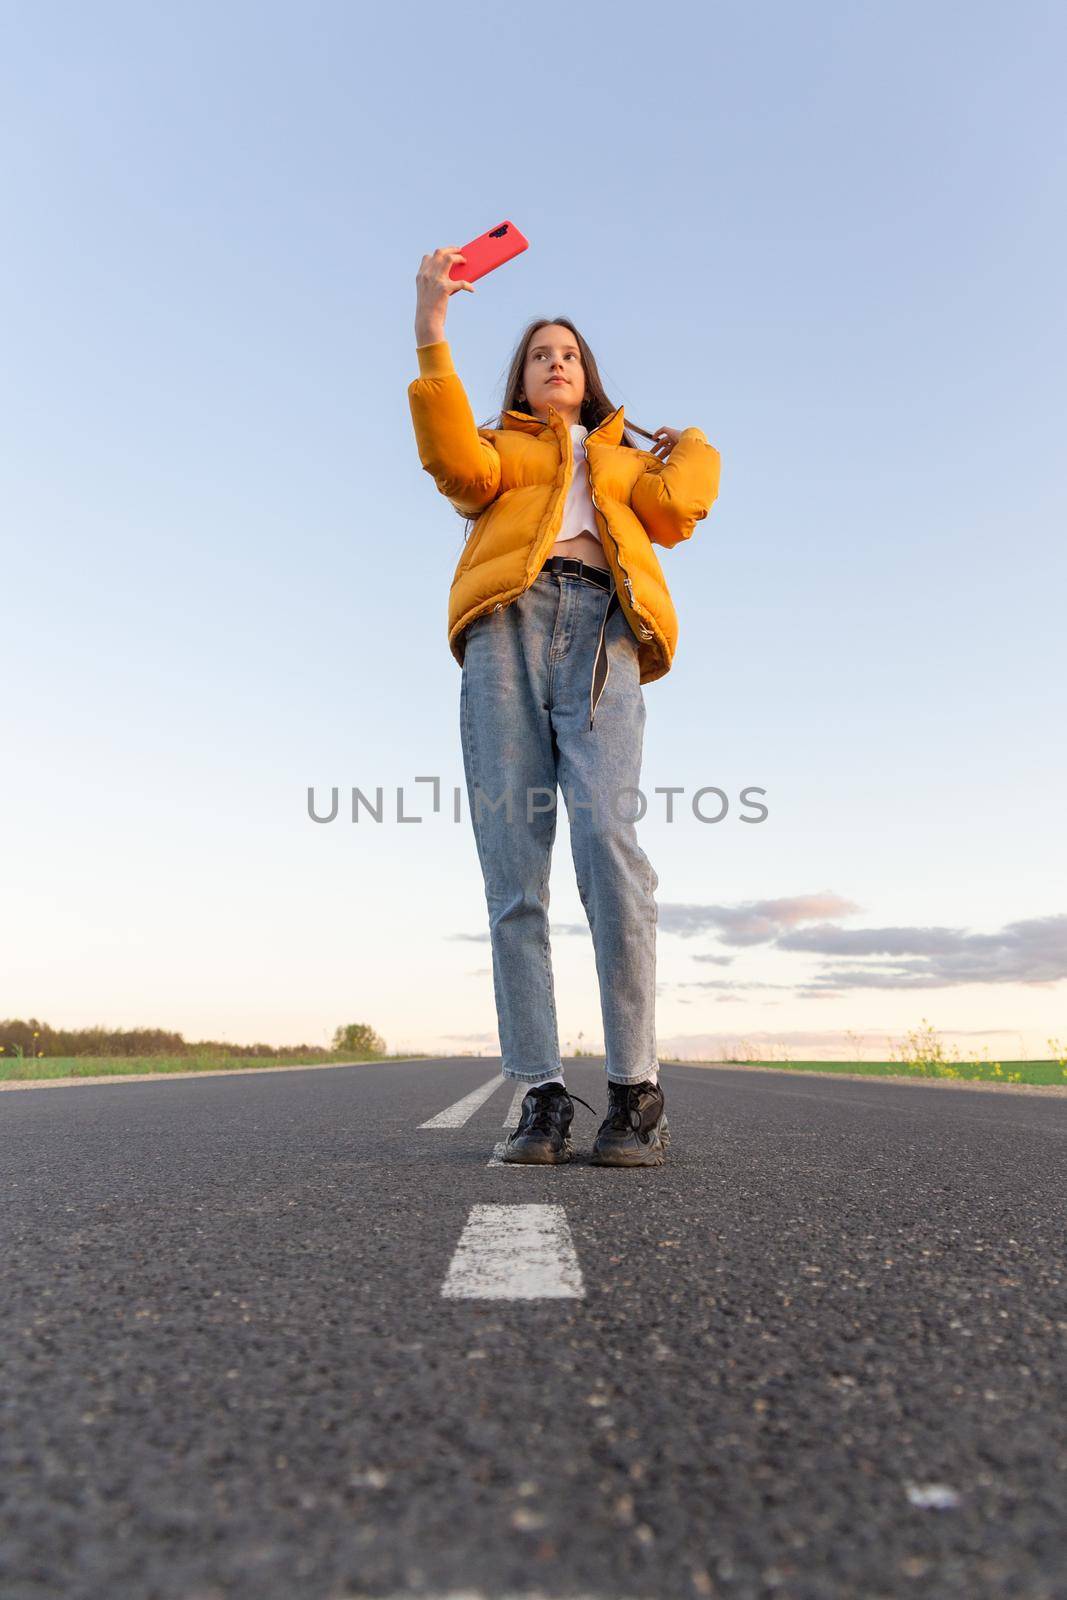 Cool modern teen girl poses on a lonely road by BY-_-BY